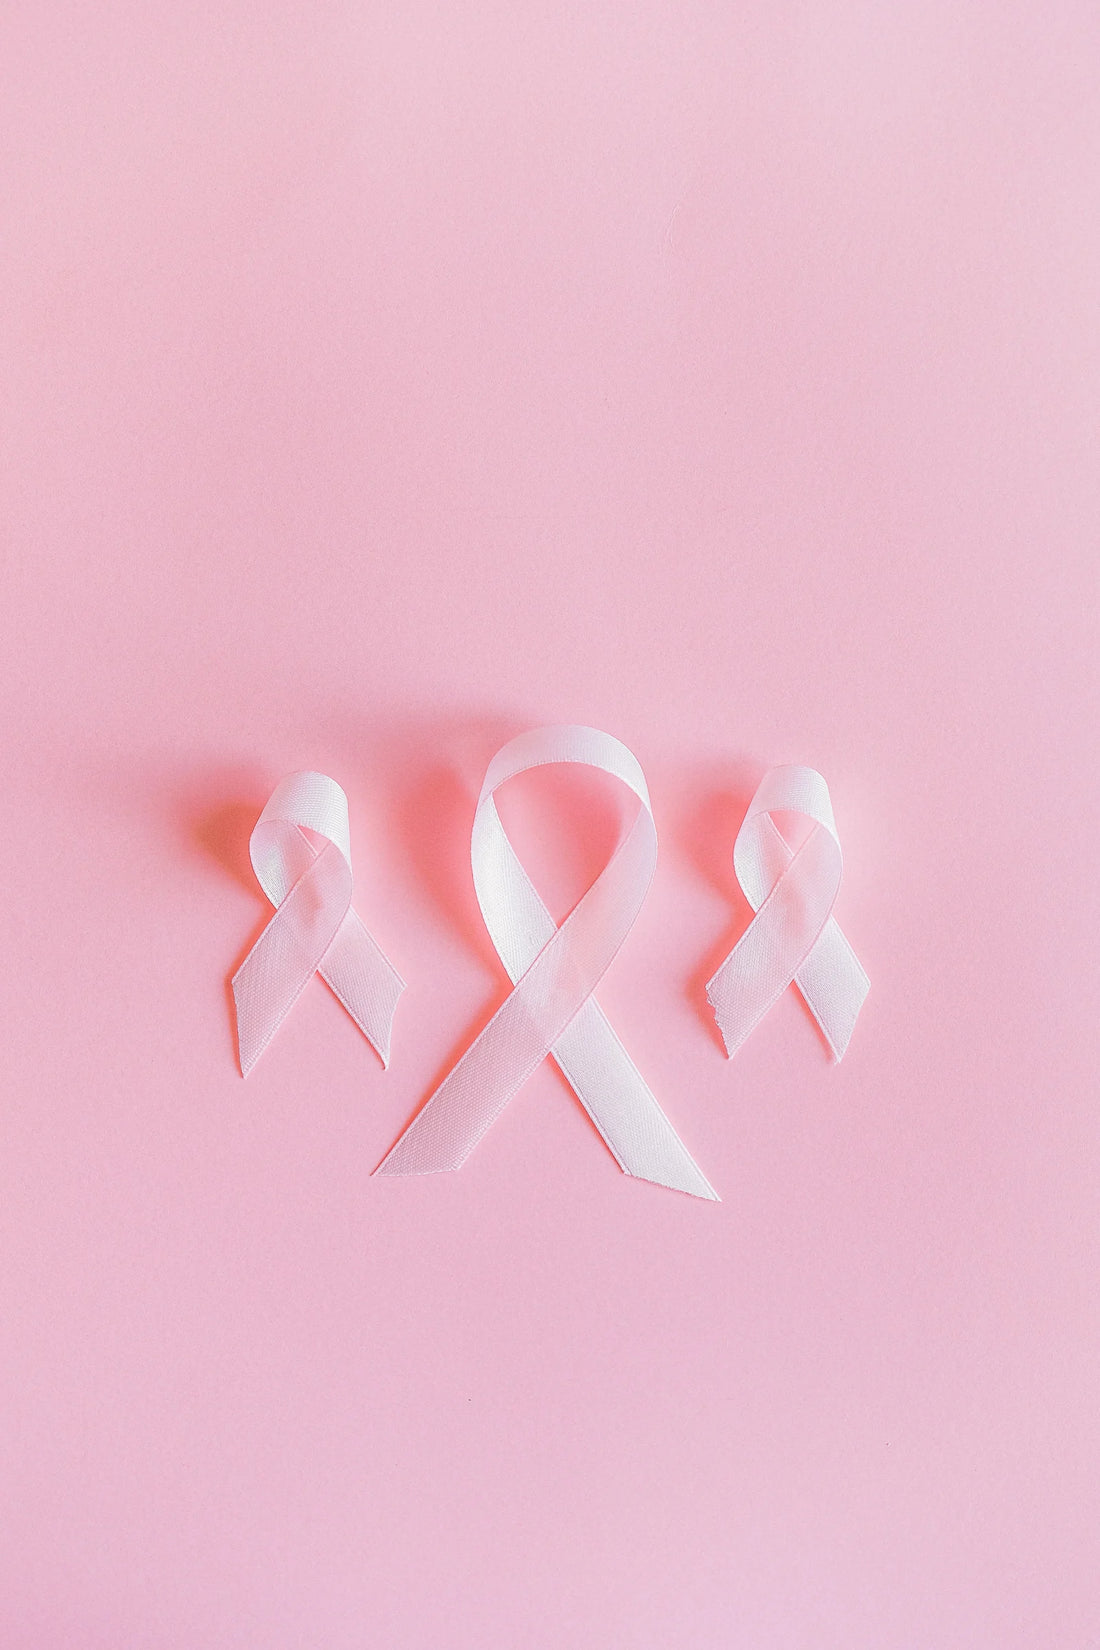 September is Gynecological Cancer Awareness Month (GCAM)!